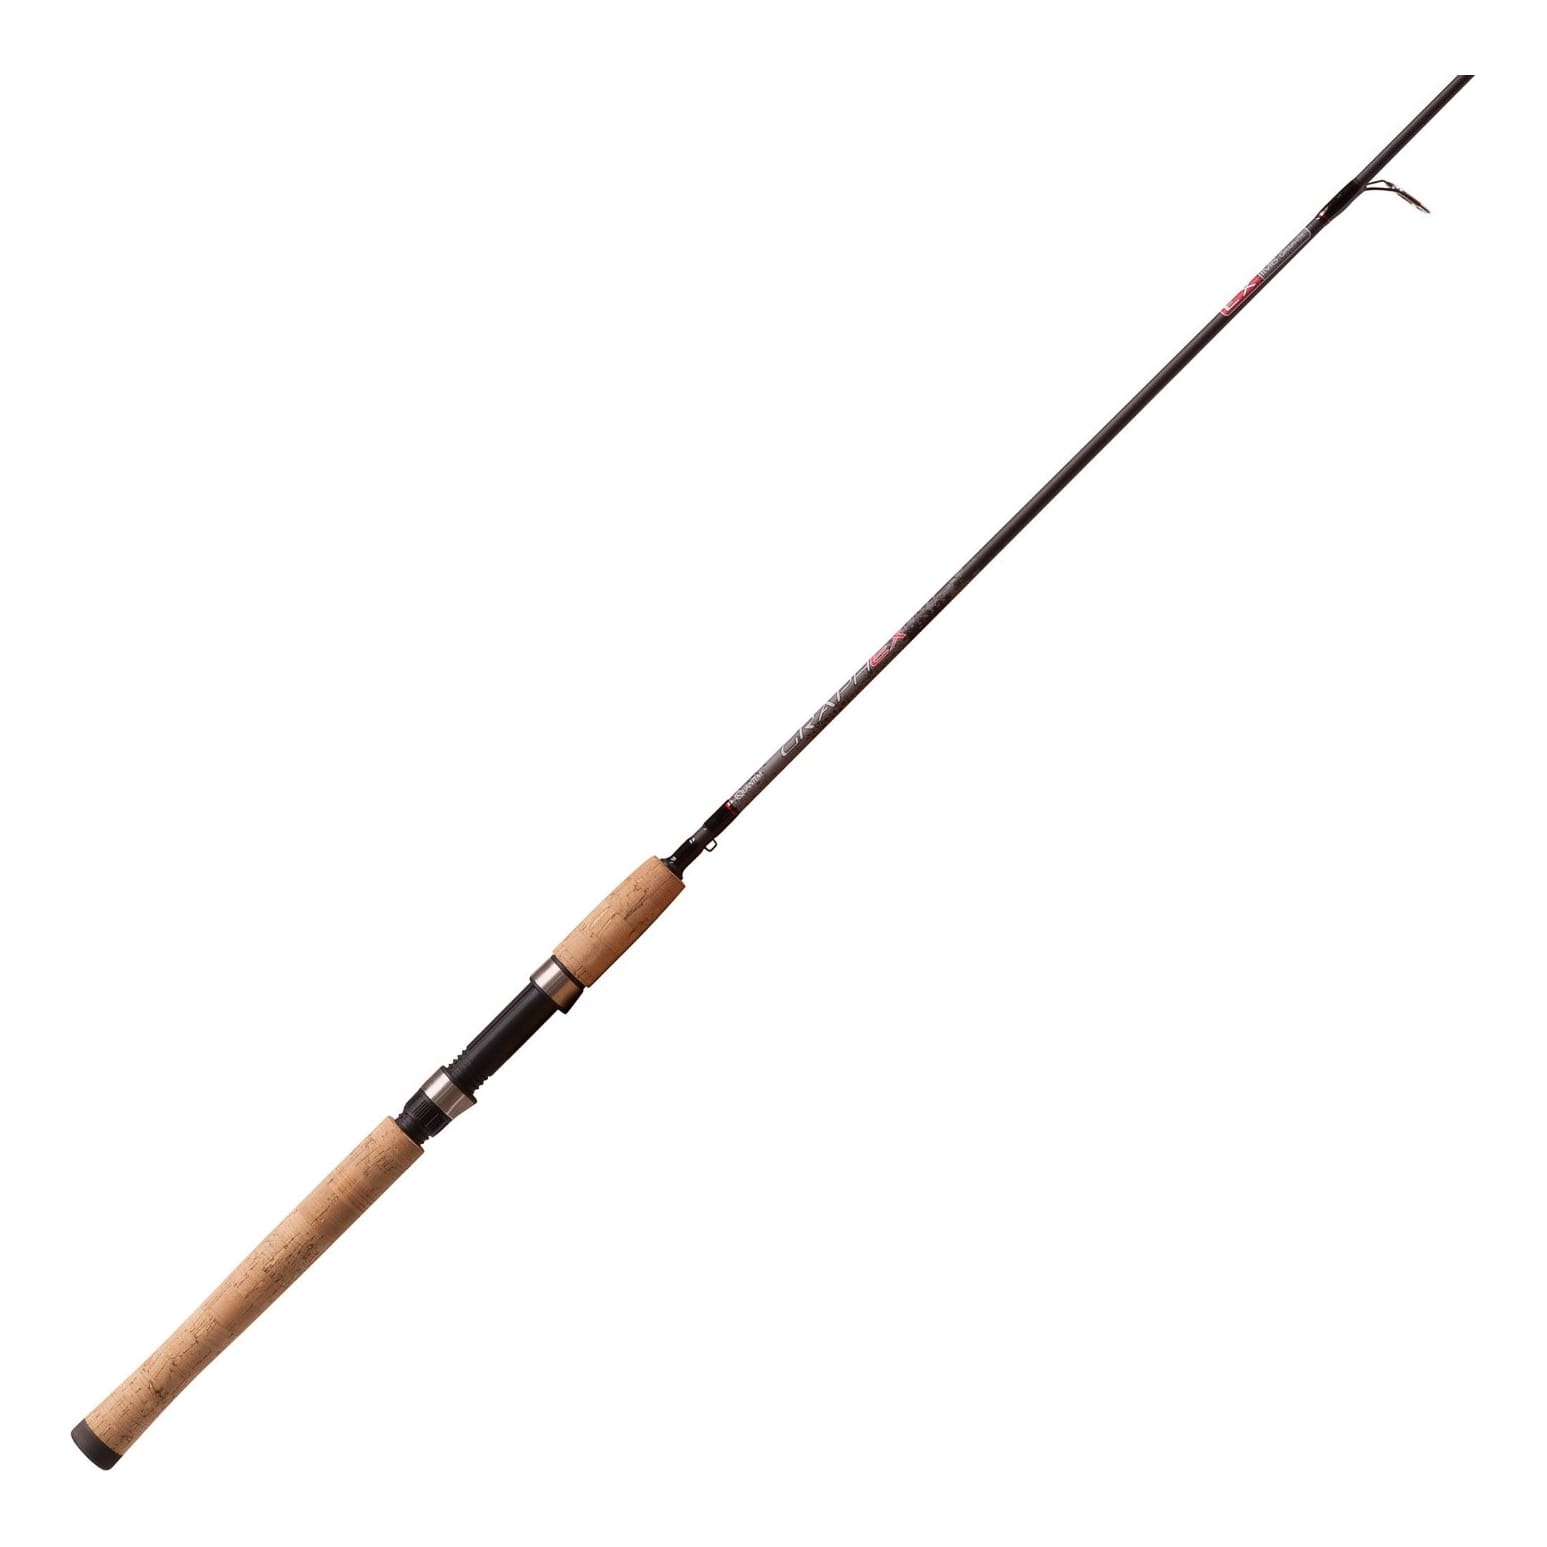 FISHING ROD/REEL PRO-LADY by: Action Part No: 9013034 - Canada - Canadian  Dollars